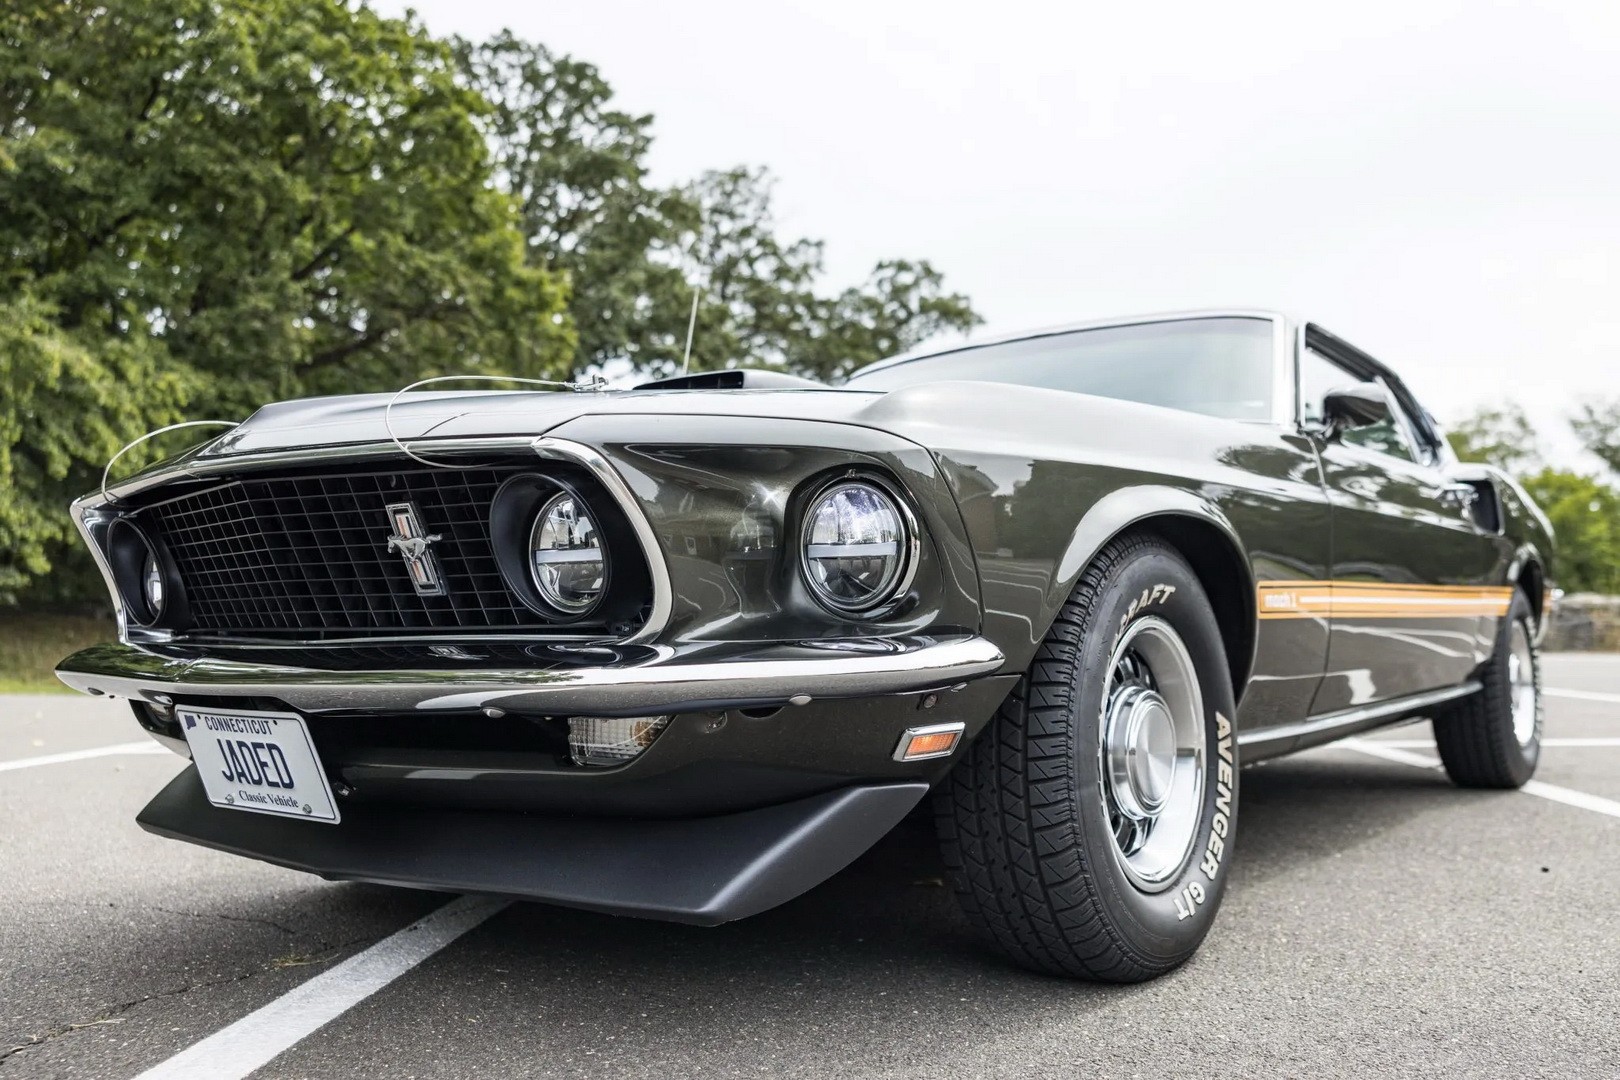 This 1969 Ford Mustang Mach 1 Once Stood Still for 20 Years, Now Looks ...